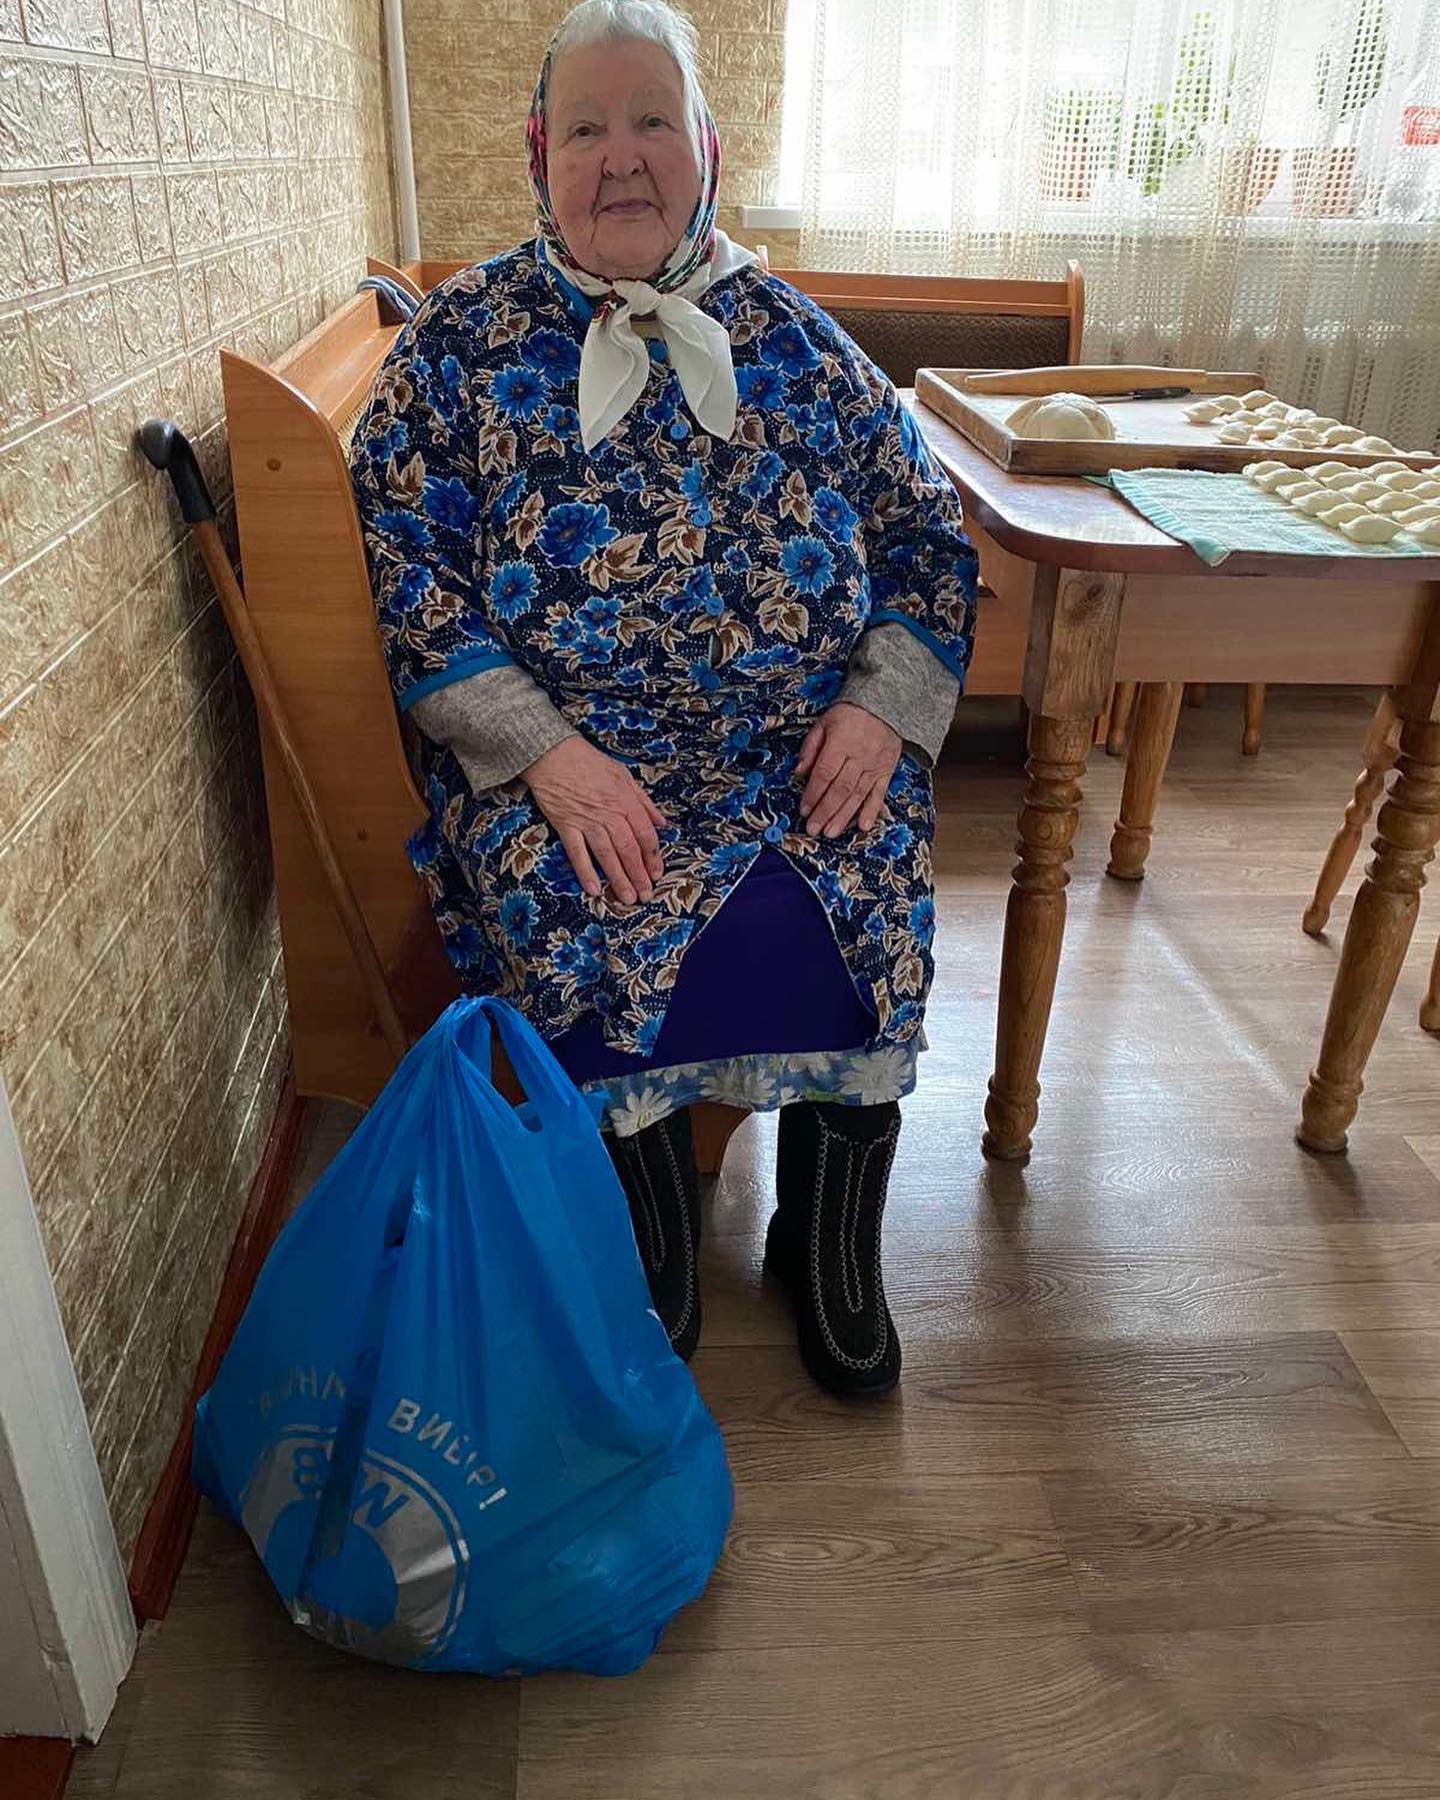 A woman sitting on a chair with a blue bag.